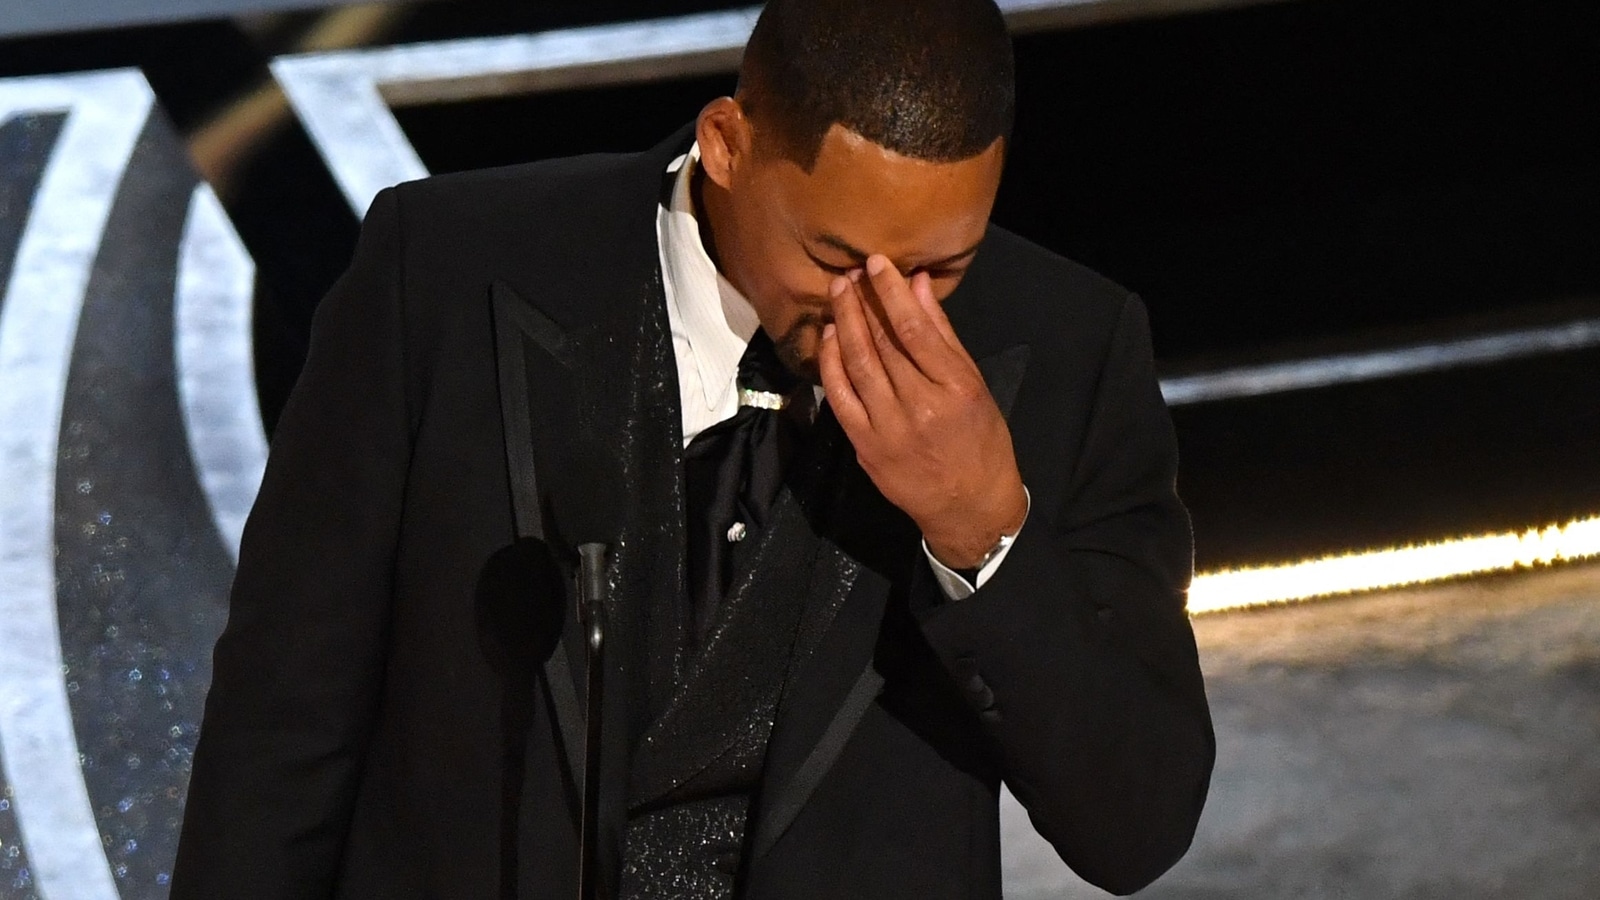 Academy accepts Will Smith’s resignation but that might not be the end of his troubles, stricter actions still on table